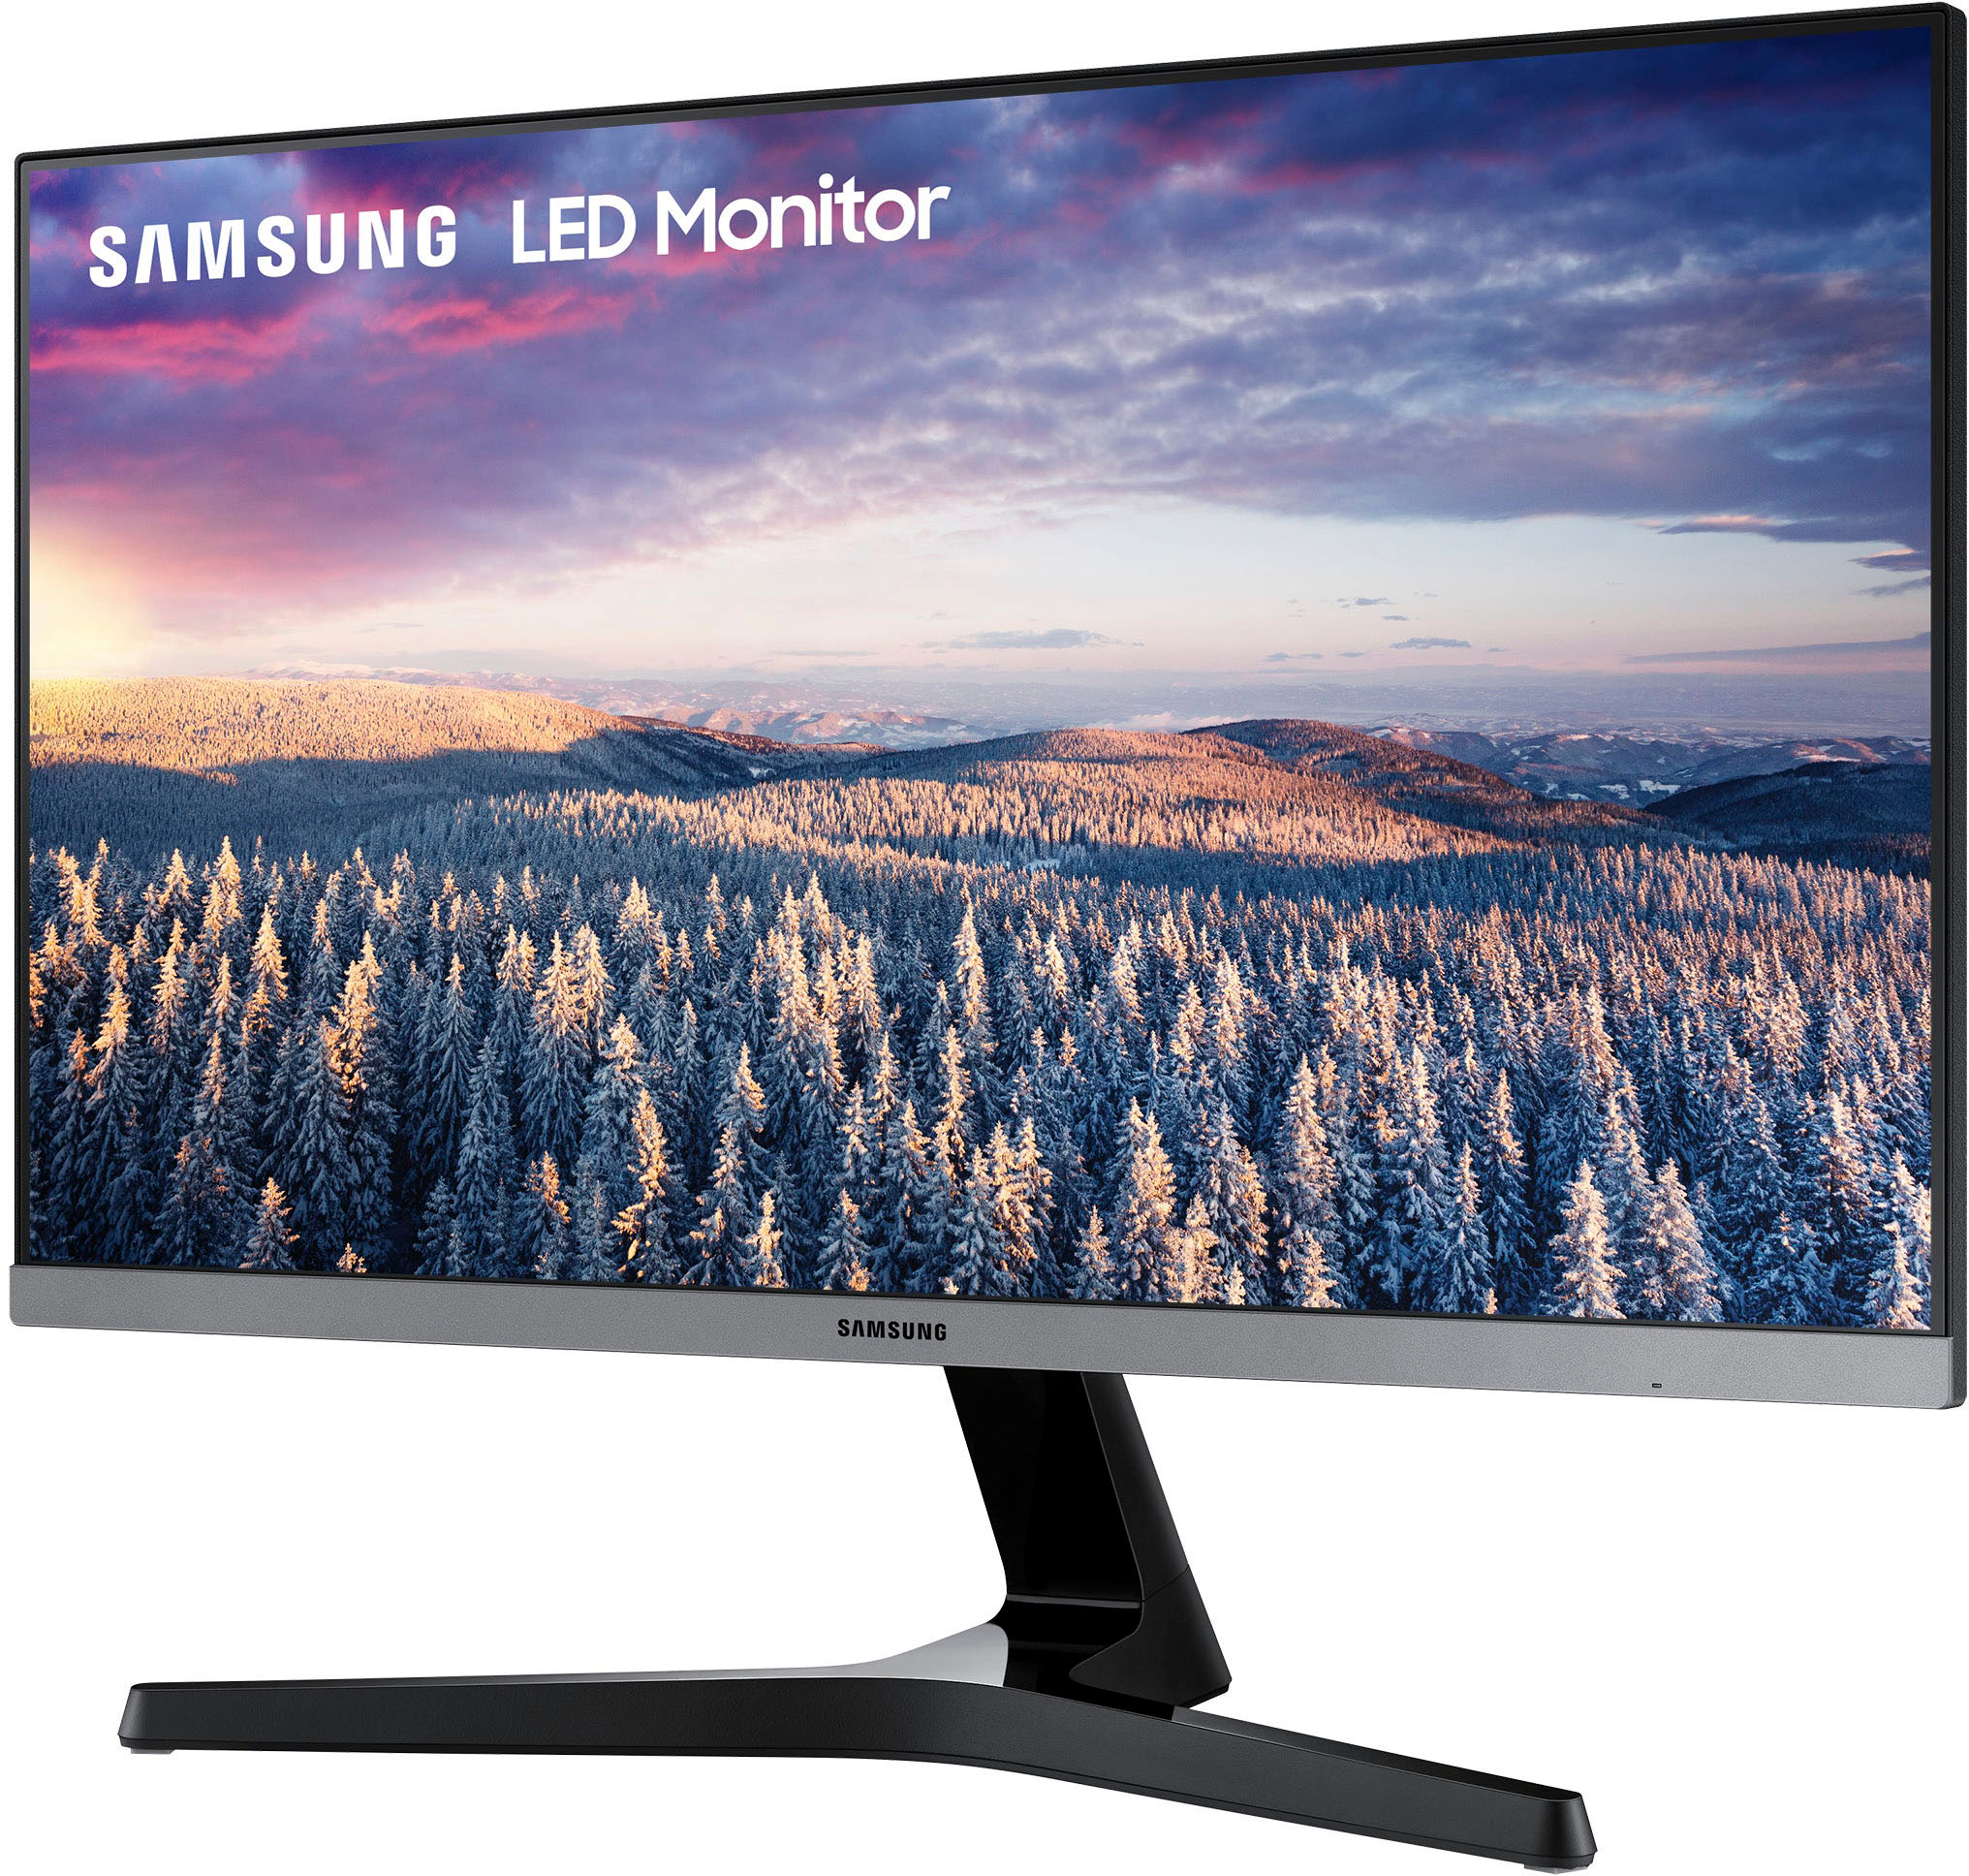 Ijsbeer snijden Nacht Samsung 24" LED FHD AMD FreeSync Monitor with bezel-less design (HDMI,  D-sub) Black LS24R35AFHNXZA - Best Buy